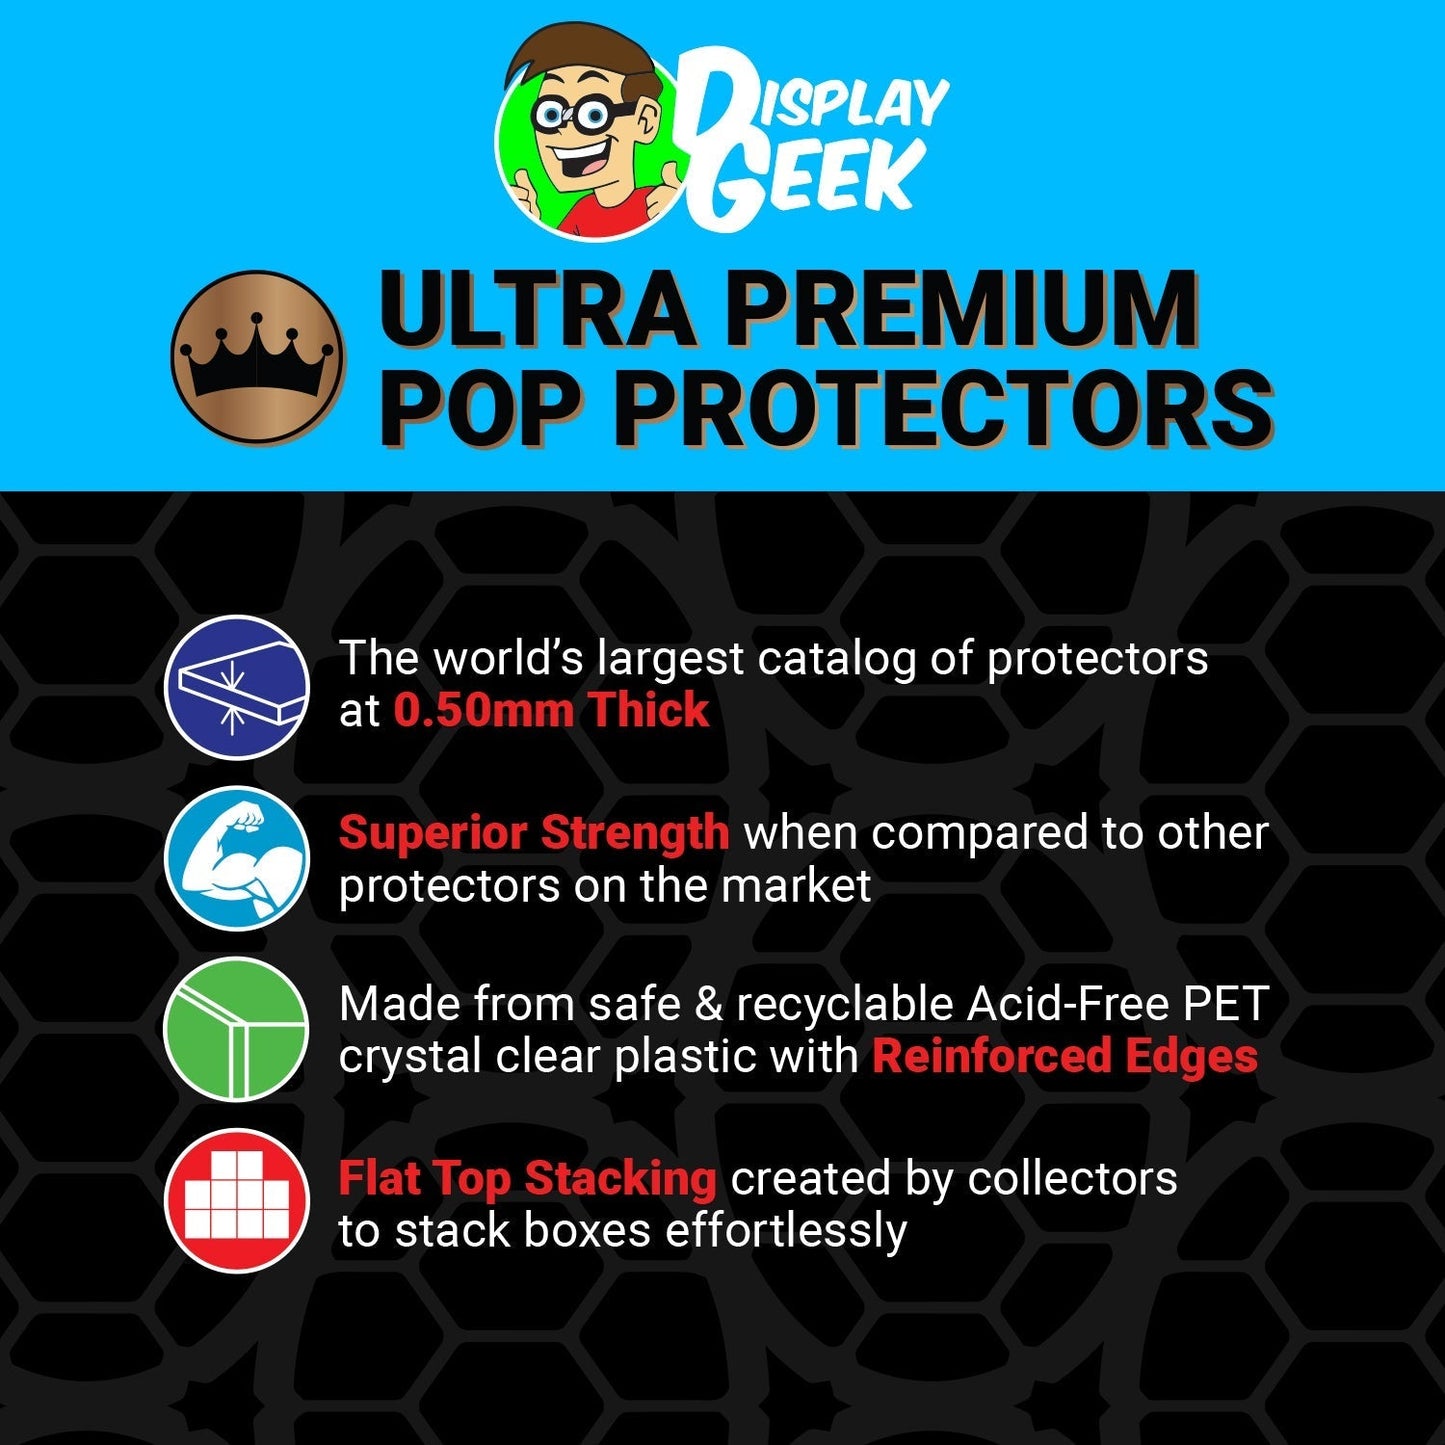 Pop Protector for Cable Funko Pop Pez - PPG Pop Protector Guide Search Created by Display Geek